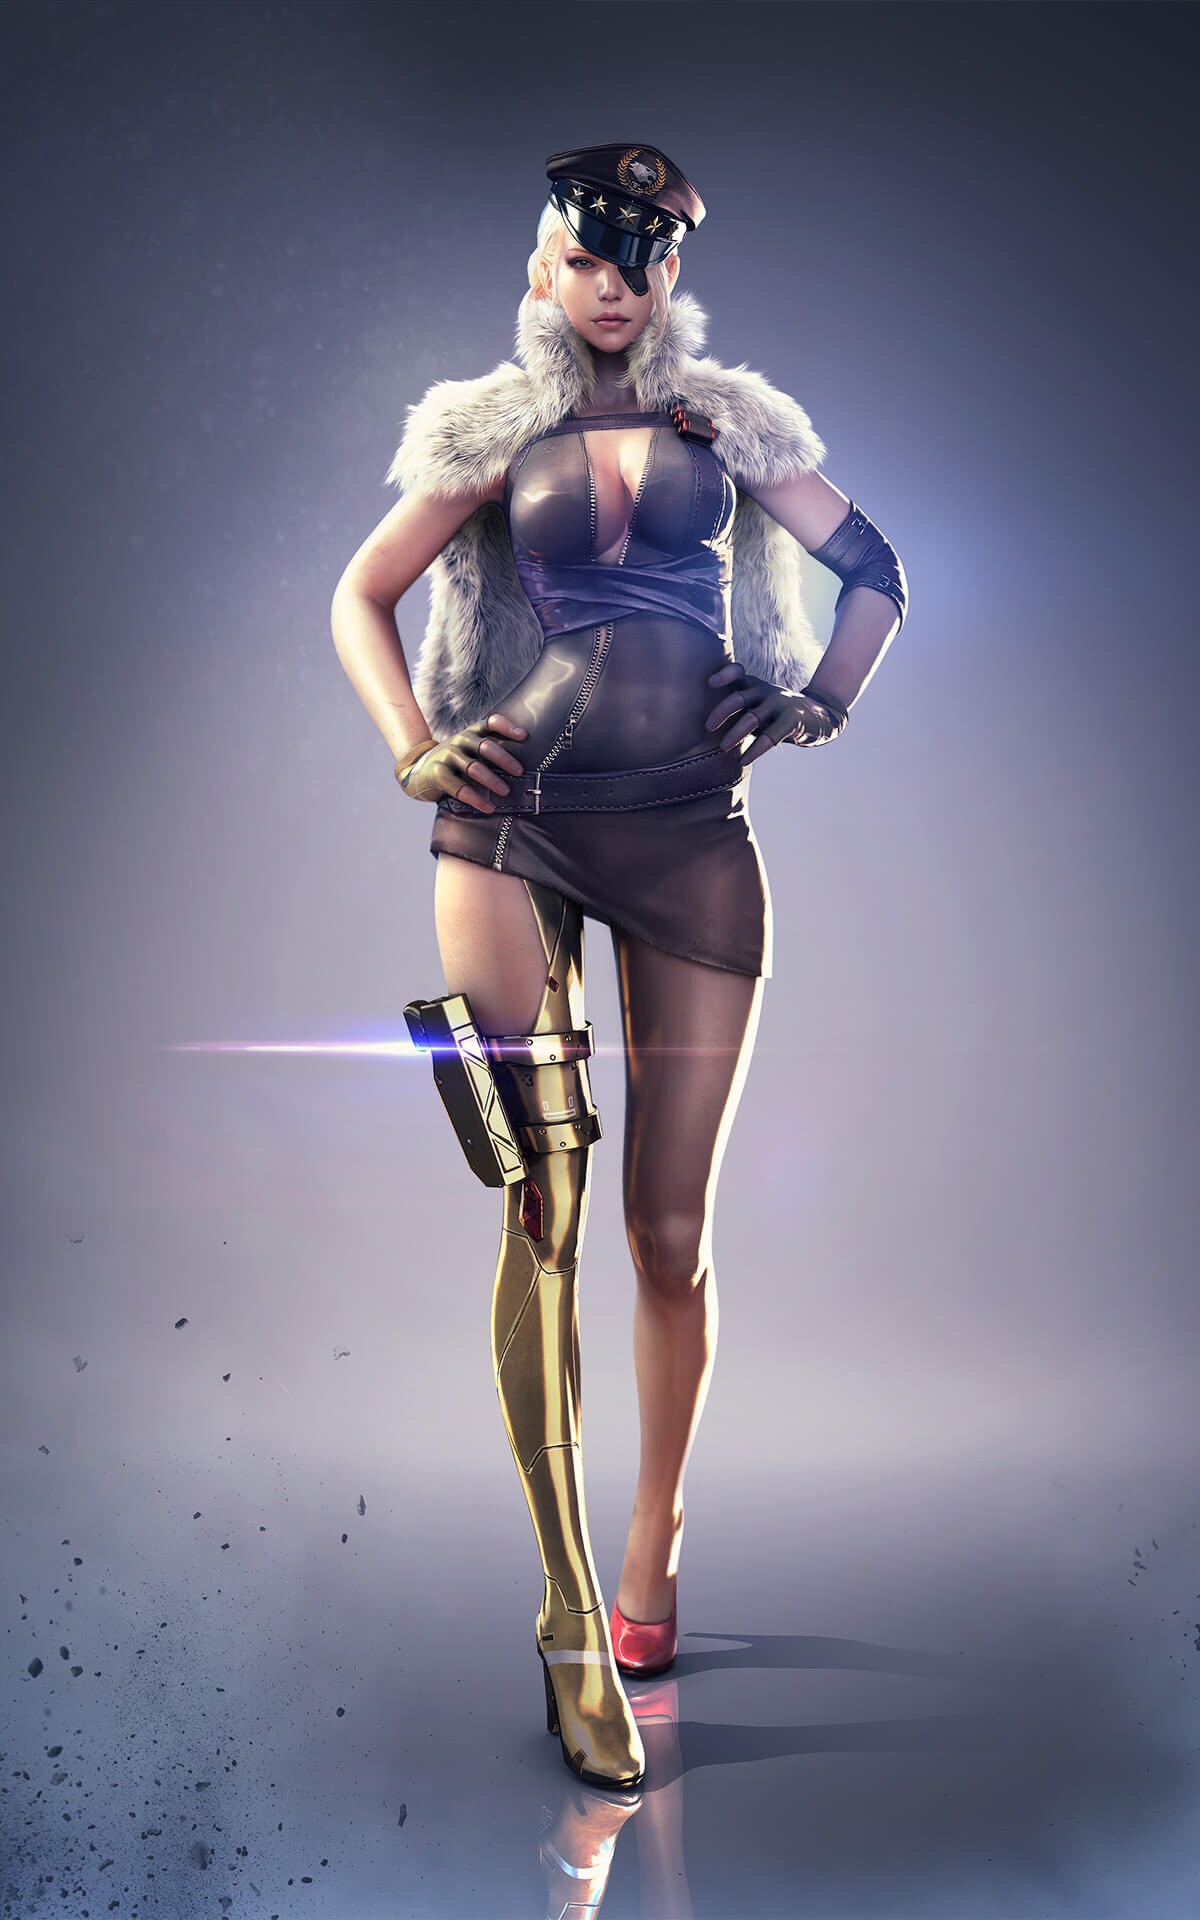 General 1200x1920 CrossFire PC gaming women video games artwork digital art boobs legs hands on hips hat women with hats video game girls